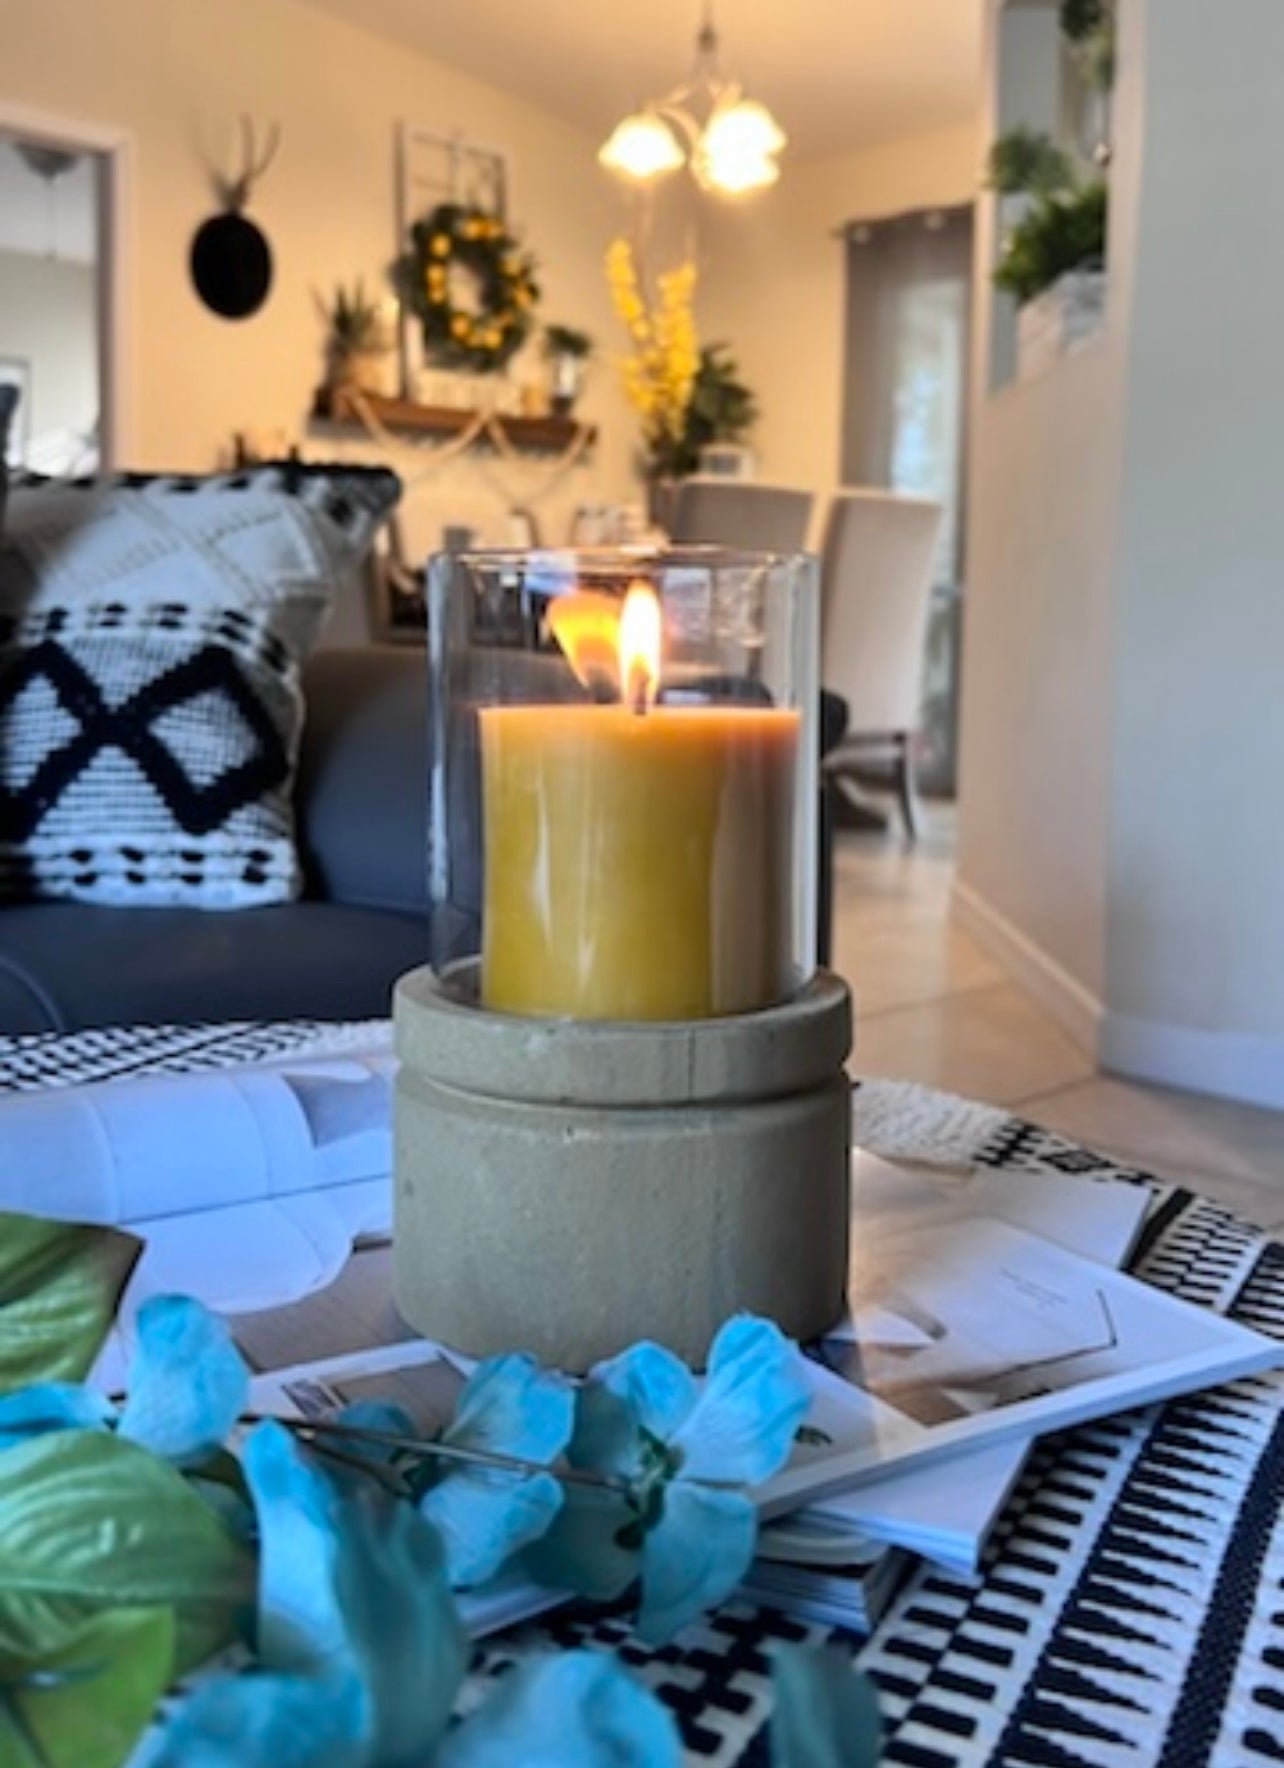 3x3 Pure Beeswax Candle